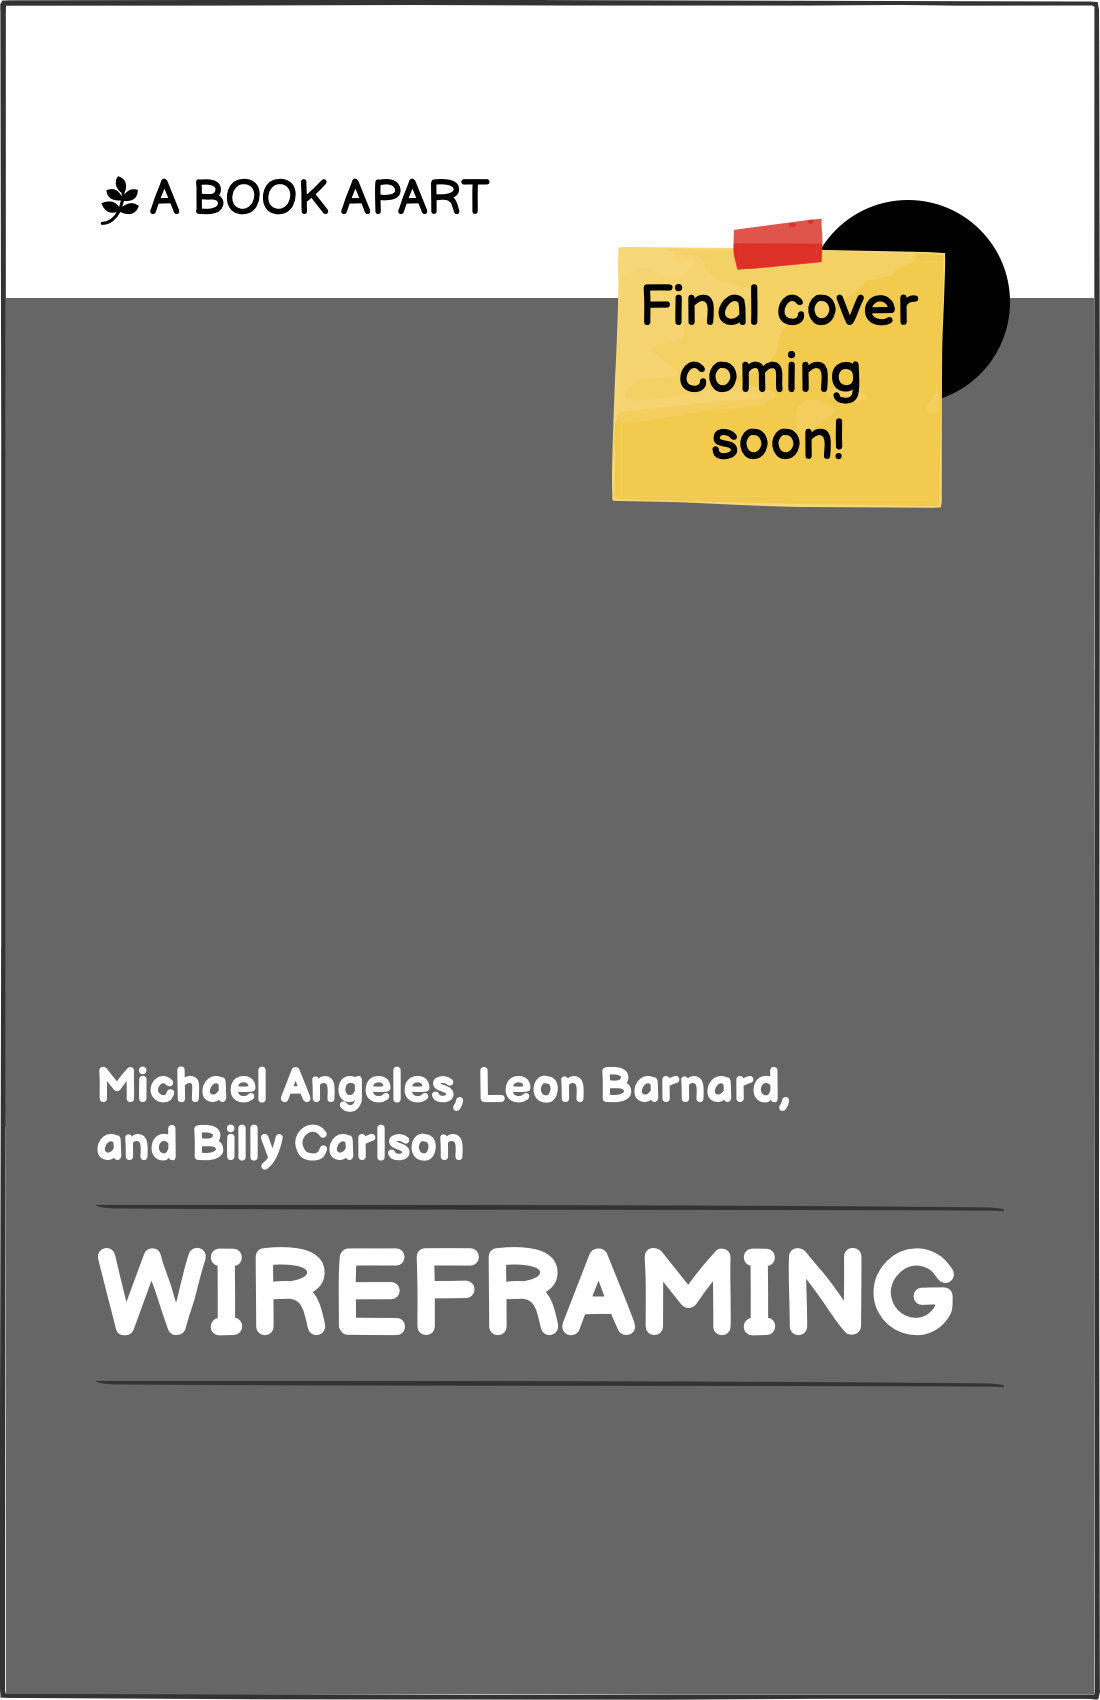 Wireframe book